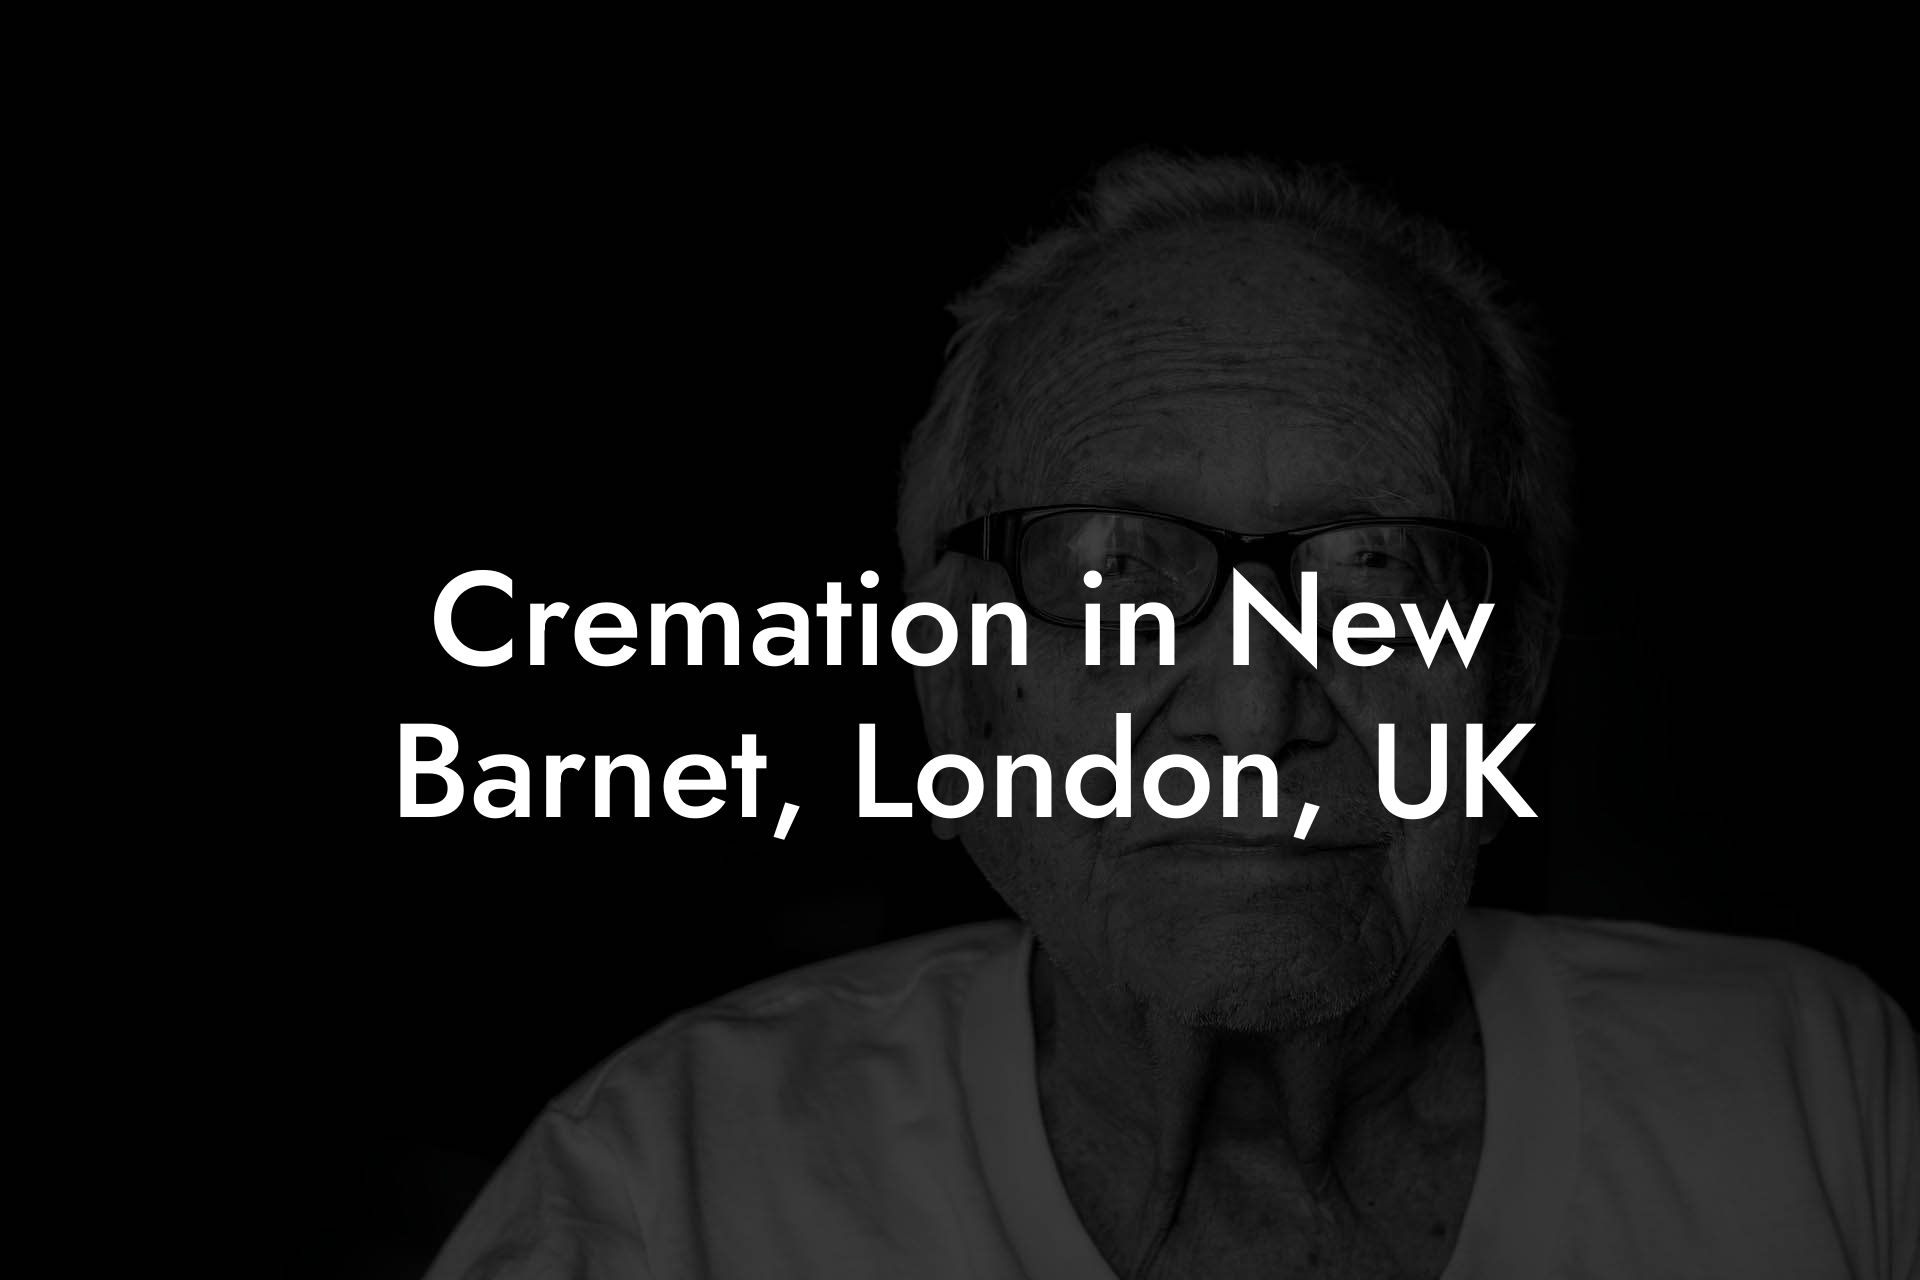 Cremation in New Barnet, London, UK